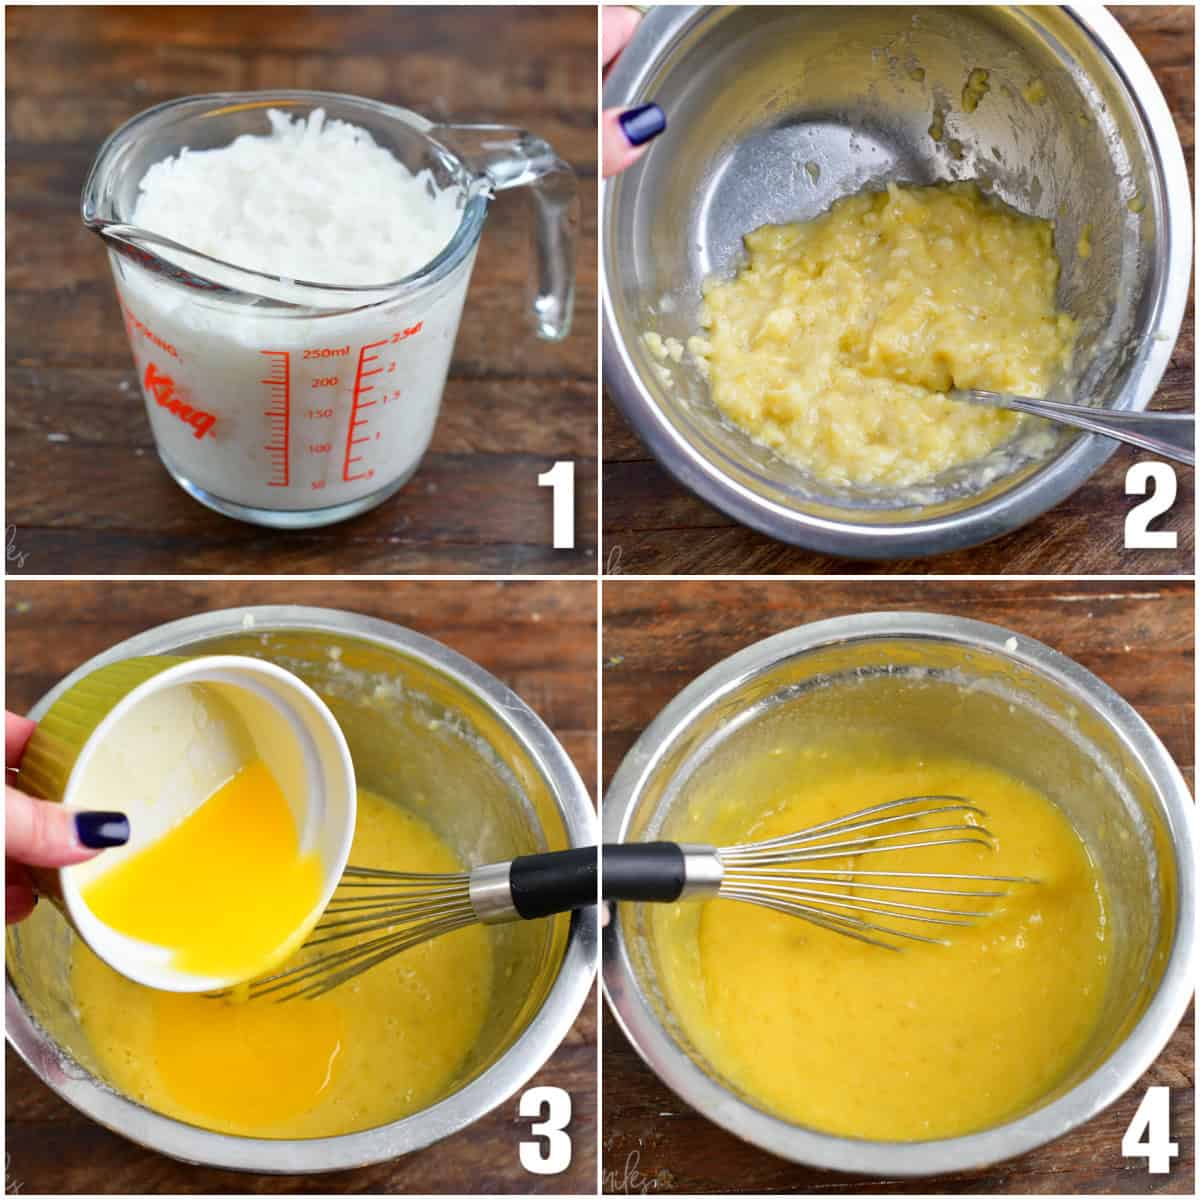 Collage of four images of soaking coconut, mashing banana, pouring butter into into banana and mixing it up.